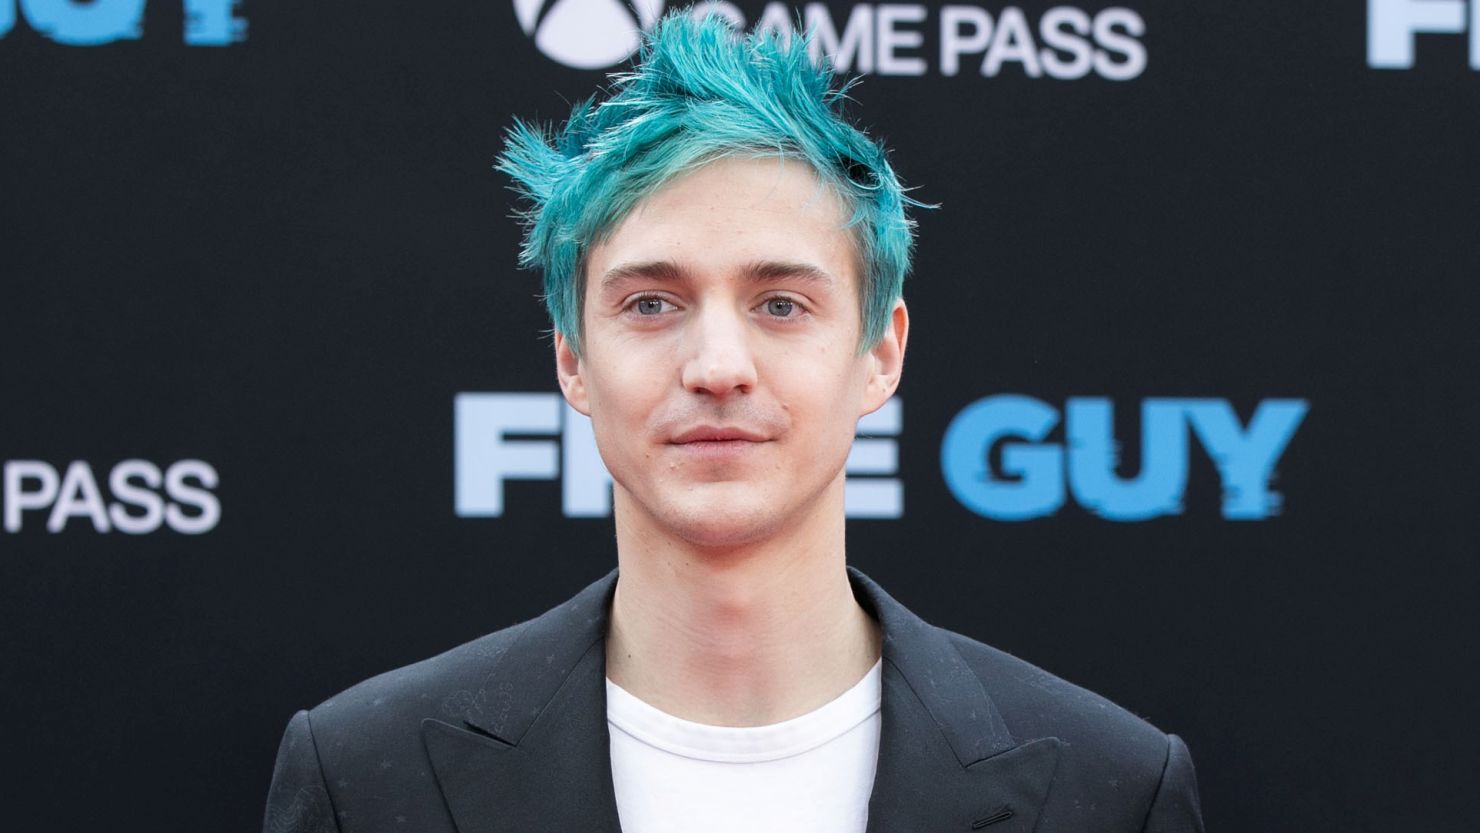 Top Twitch streamer Tyler "Ninja" Blevins was diagnosed with melanoma after doctors found a cancerous mole on the bottom of his foot during a routine skin check.